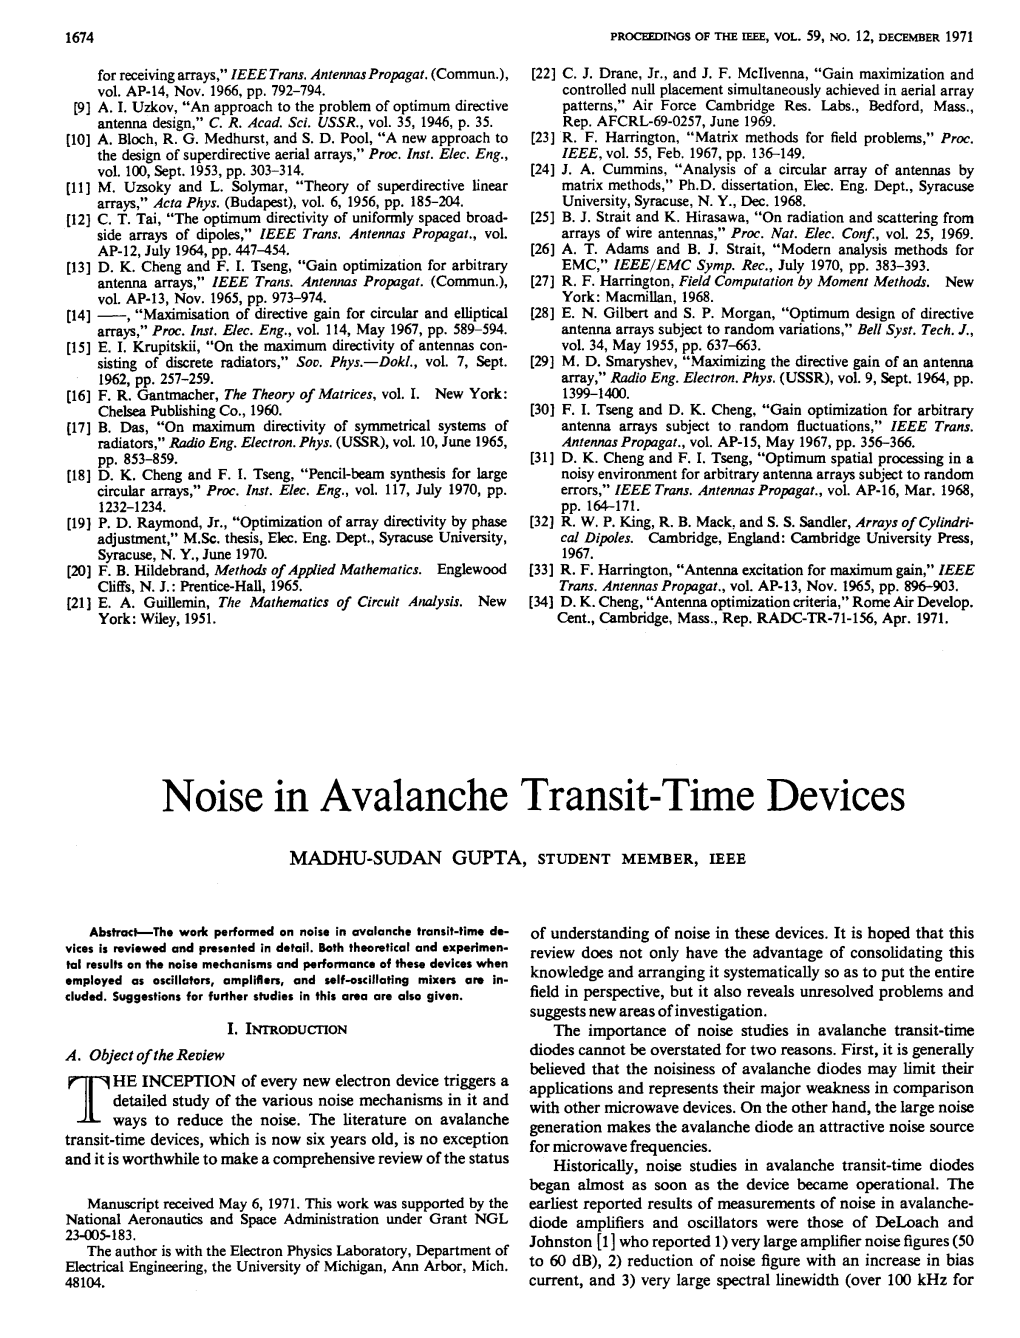 Noise in Avalanche Transit-Time Devices